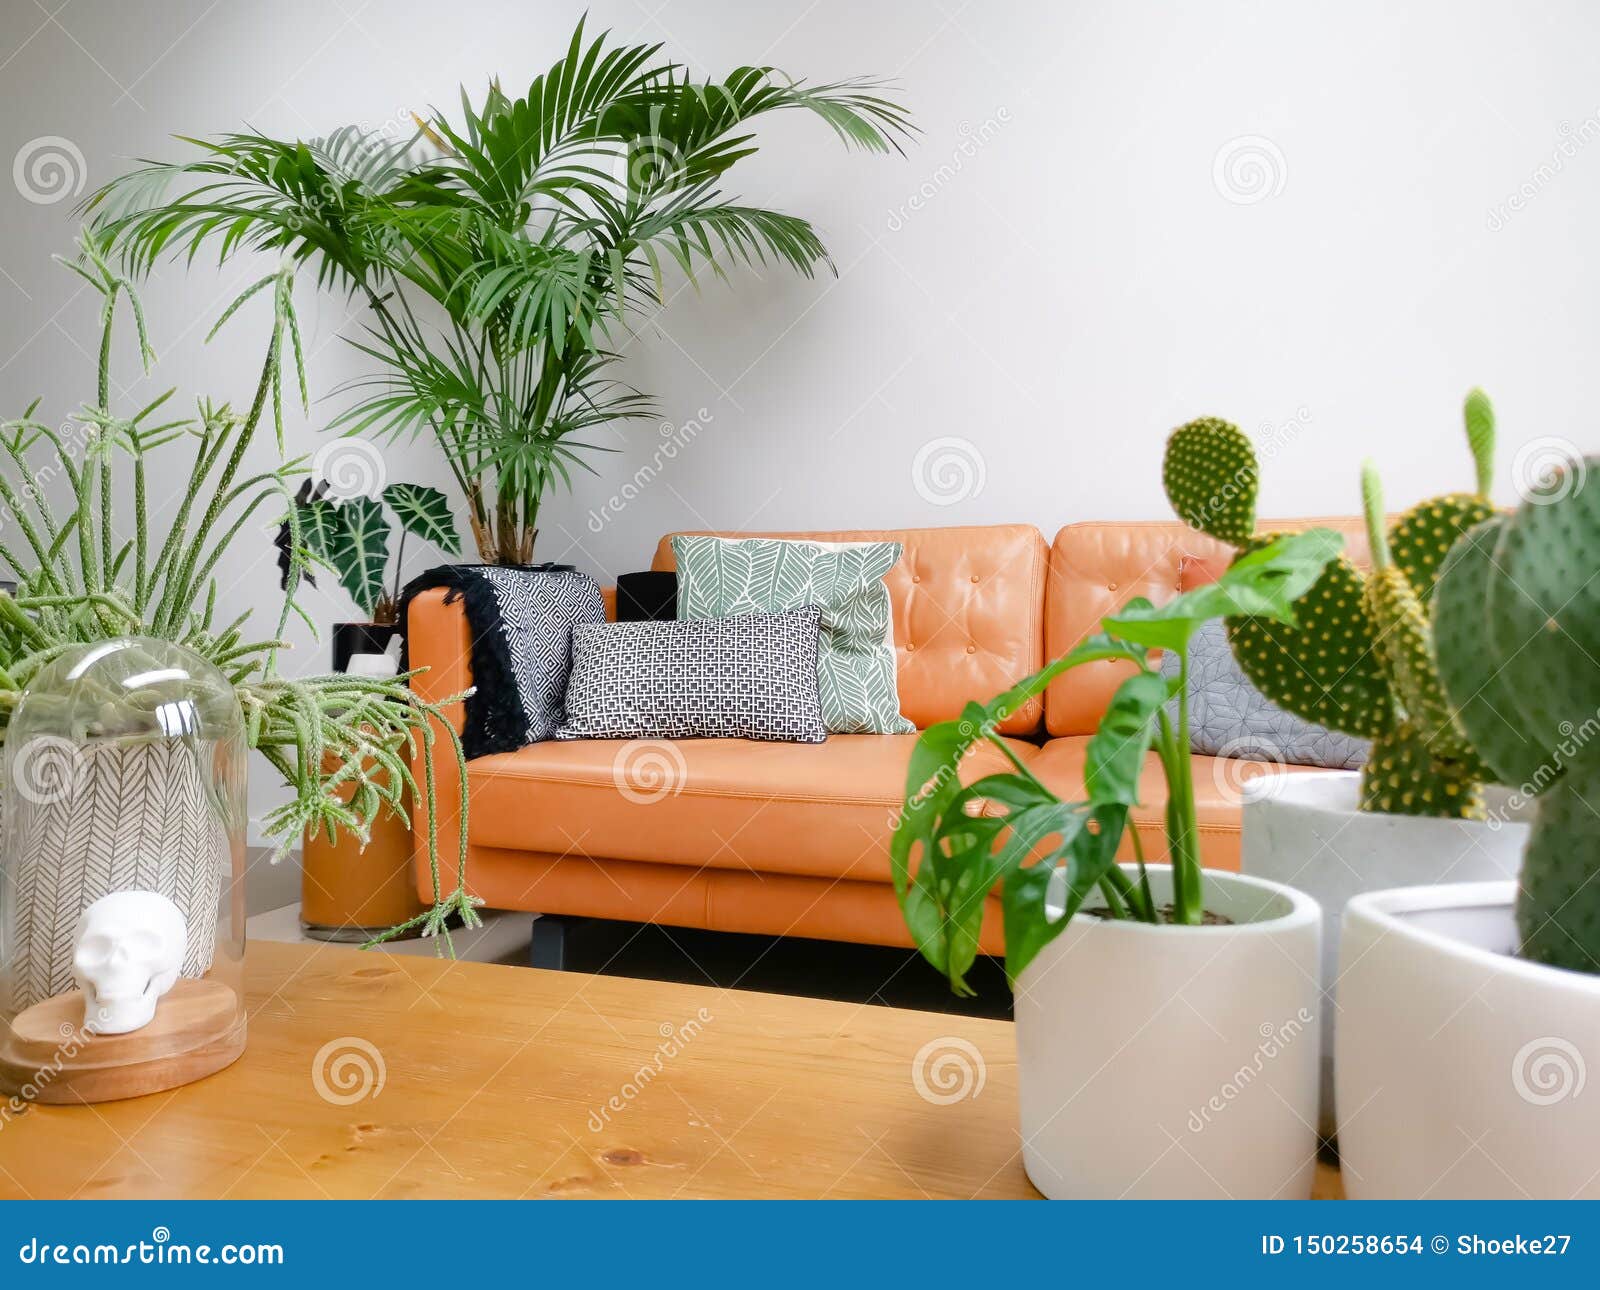 light modern living room with brown leather couch and numerous green houseplants creating an urban jungle